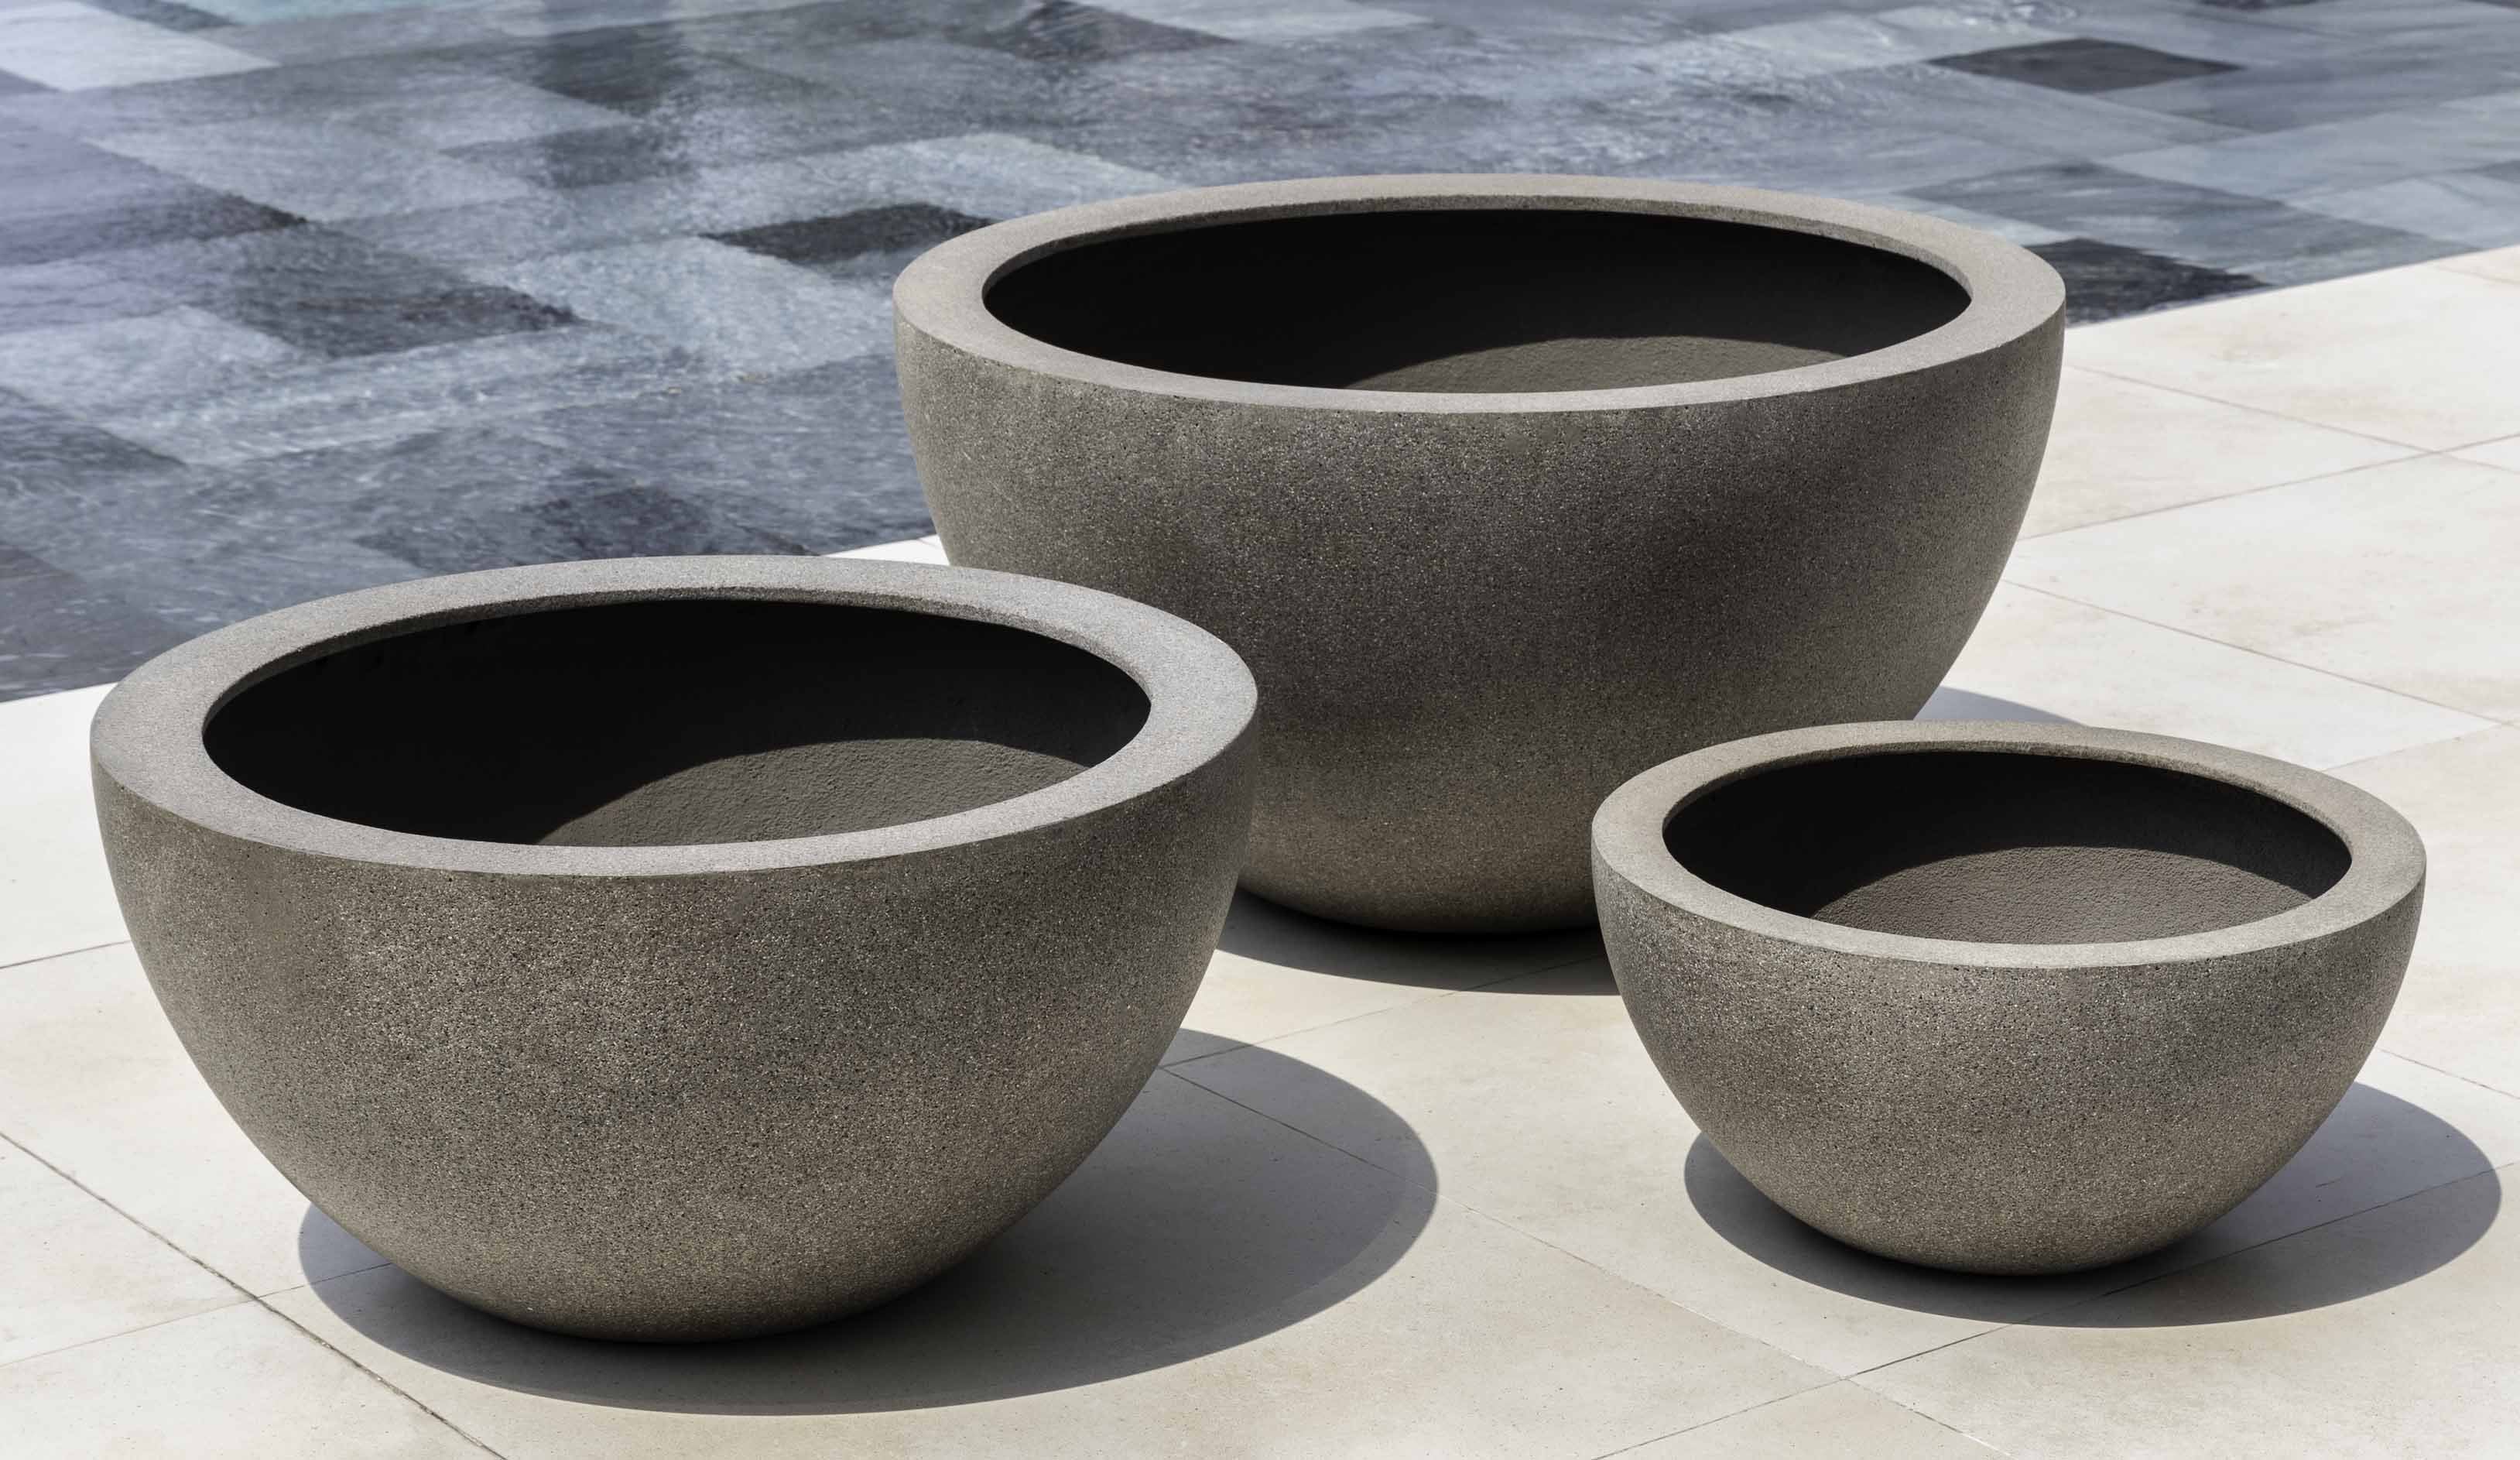 Photo of Campania Piccadilly Planters - Exclusively Campania